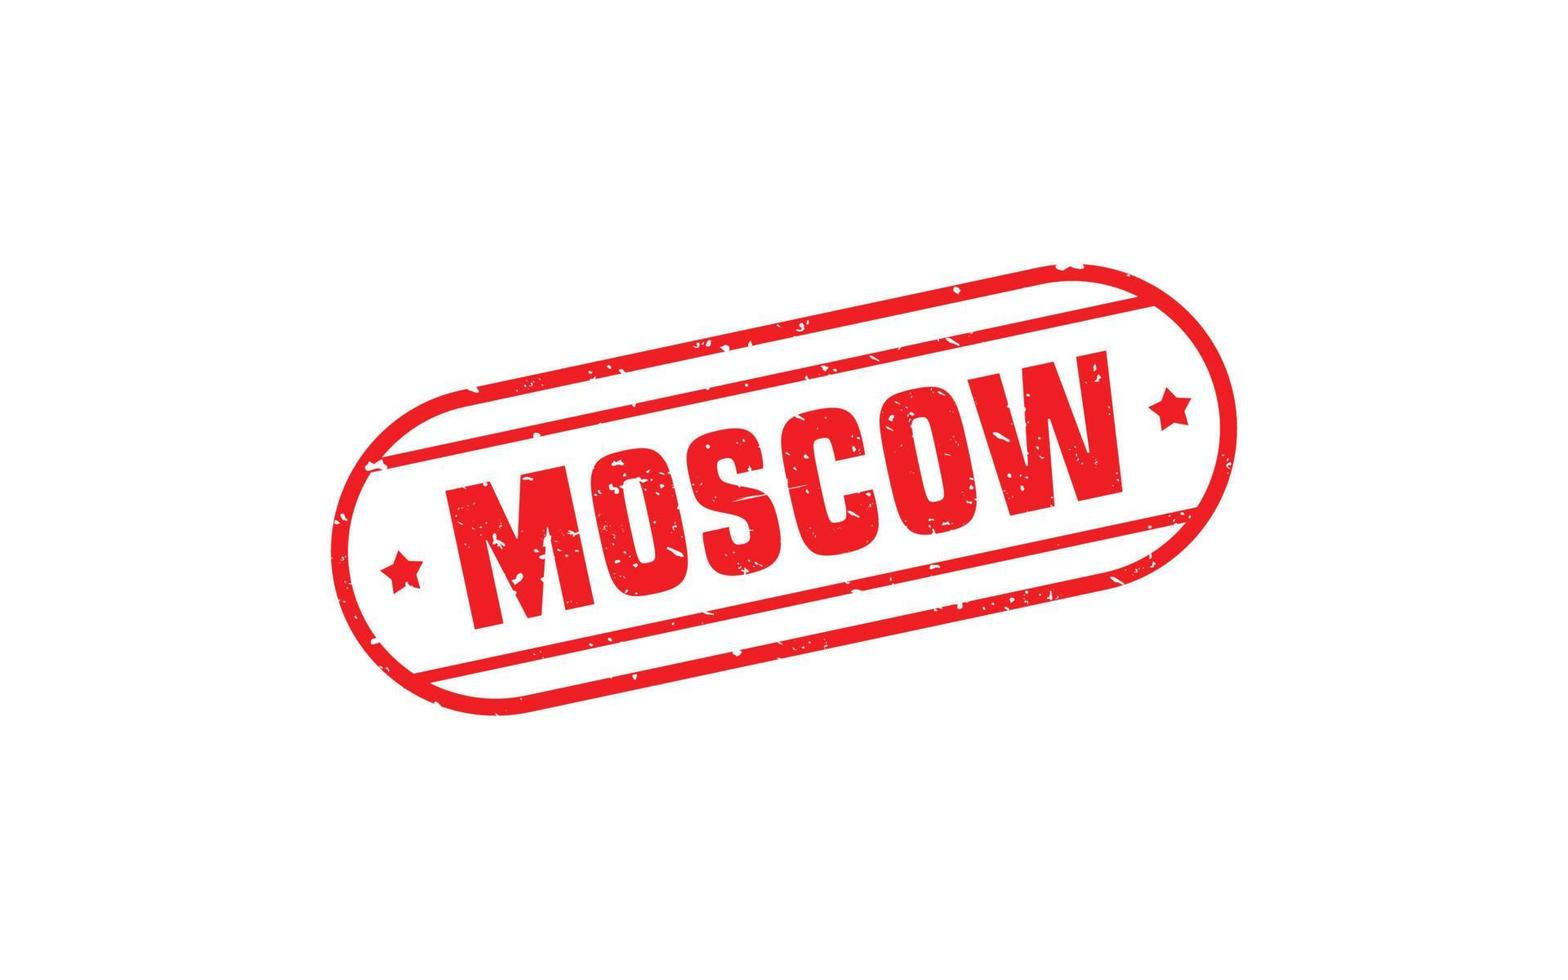 MOSCOW RUSSIA rubber stamp texture with grunge style on white background vector